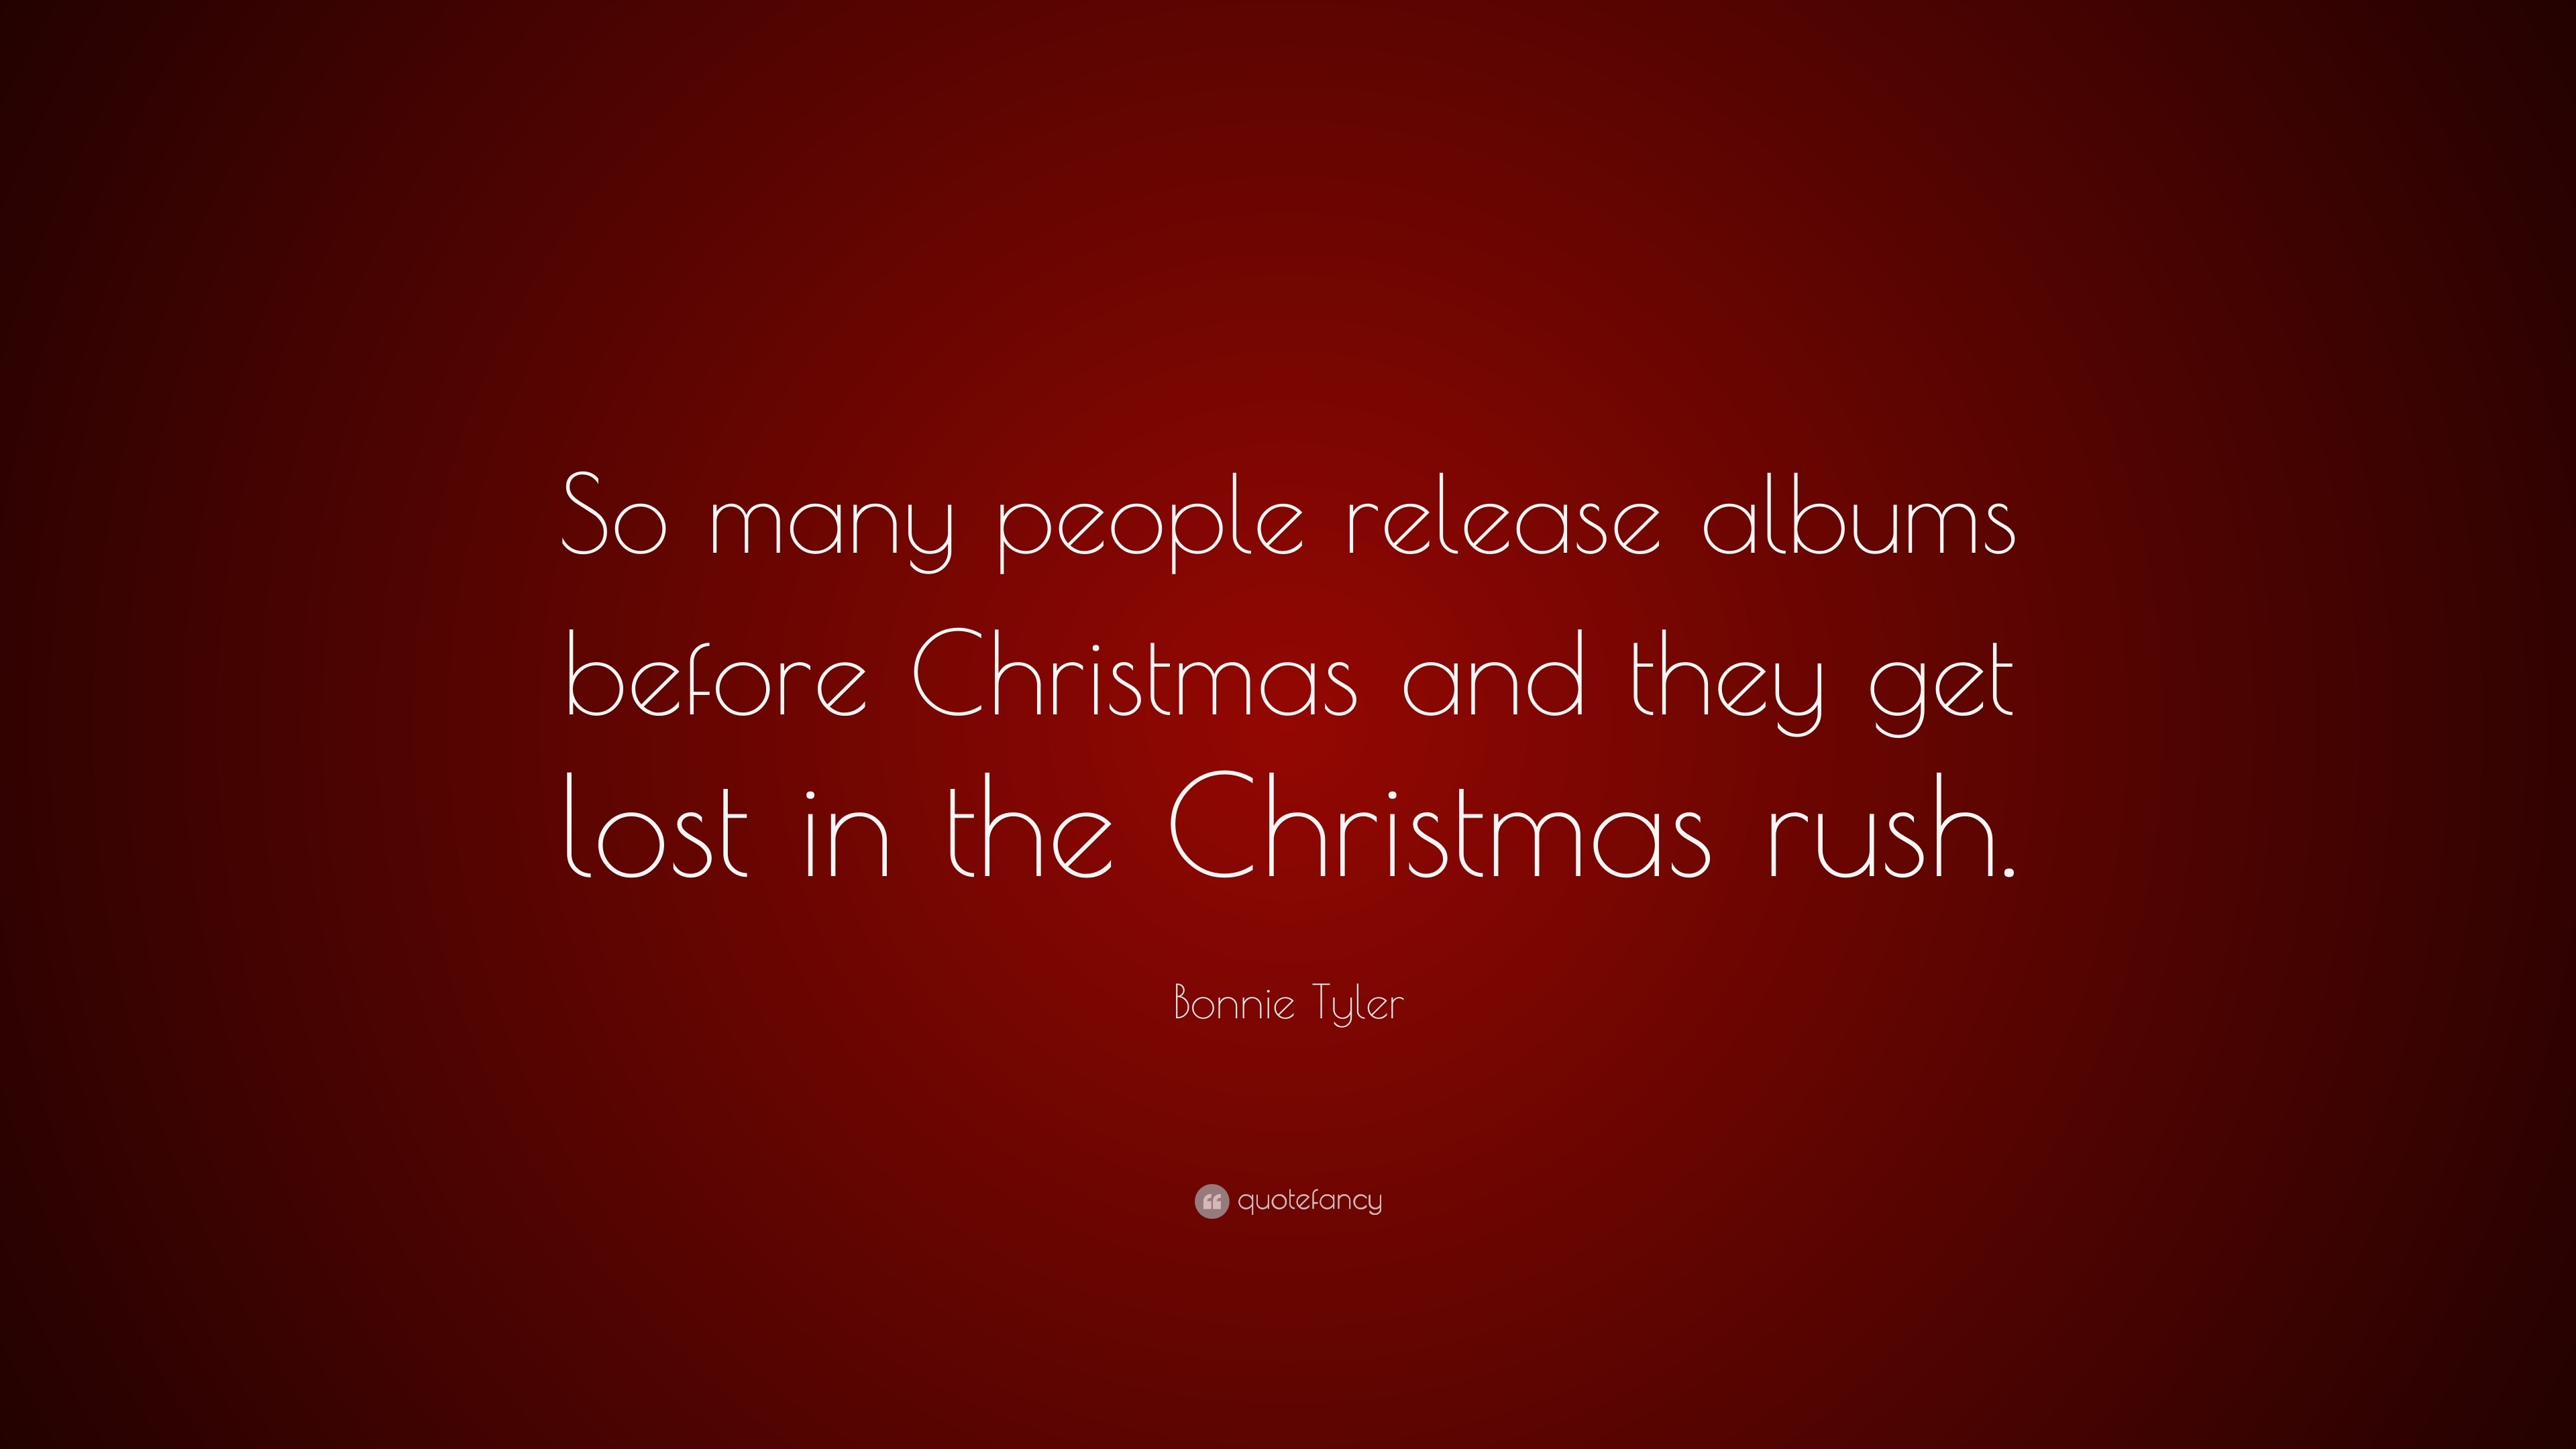 Bonnie Tyler Quote: “So many people release albums before Christmas and ...